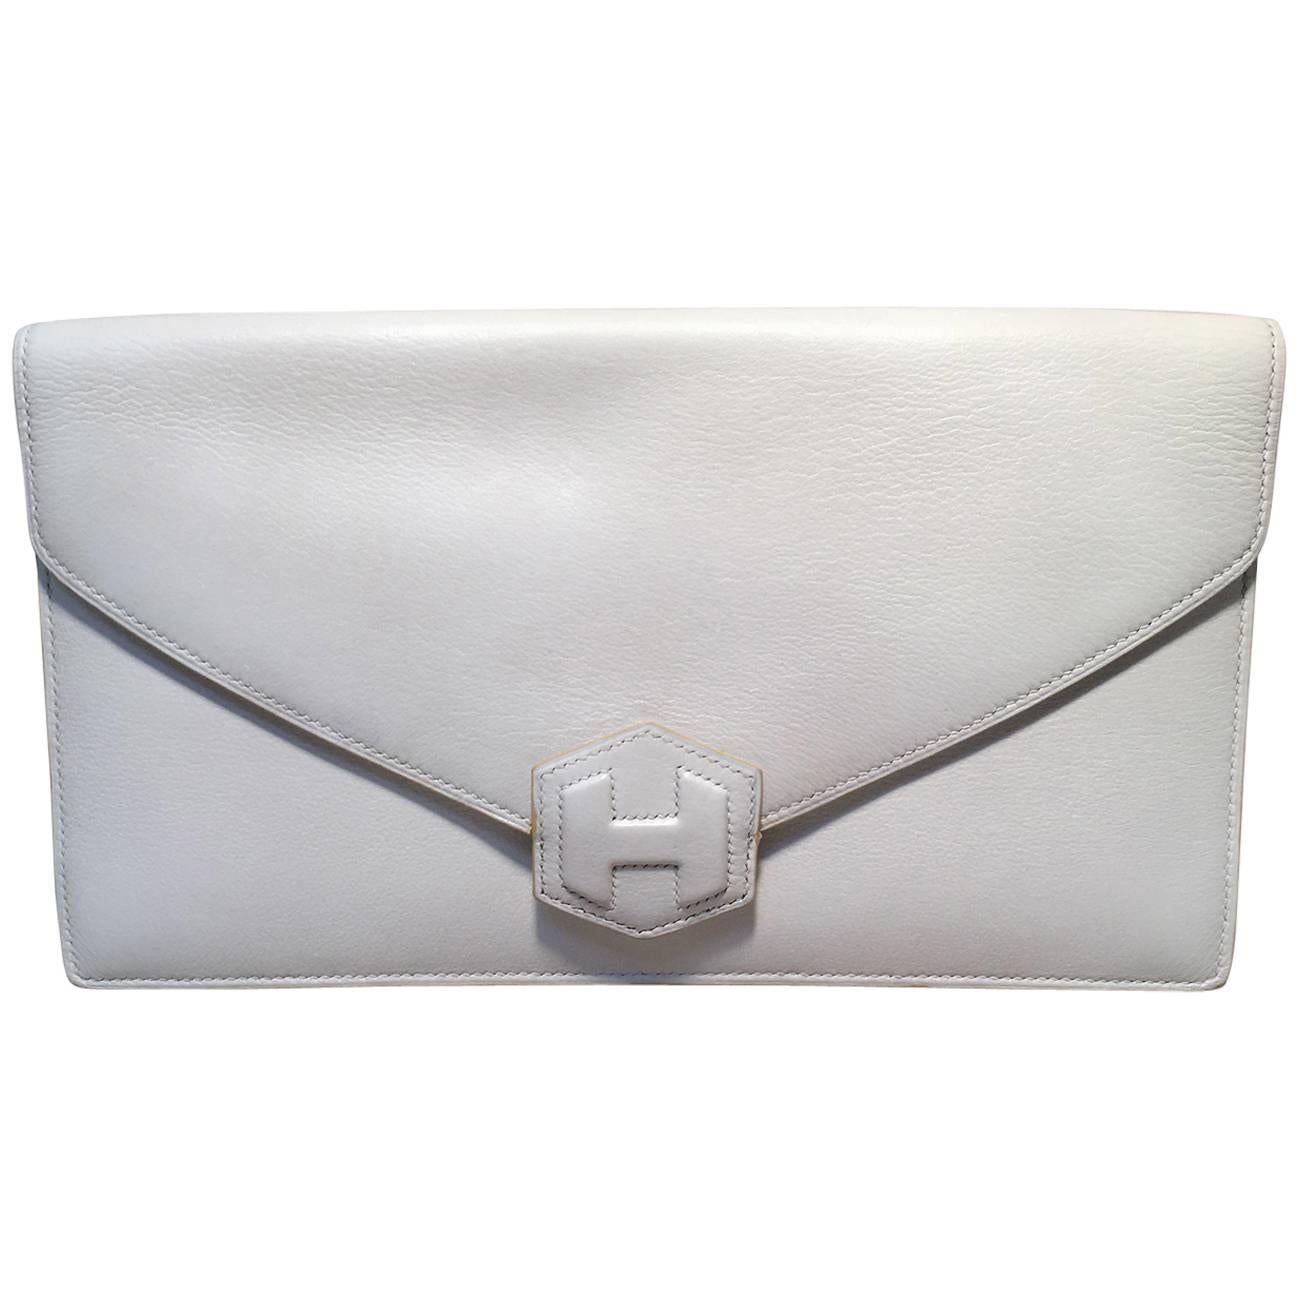 RARE Hermes Vintage White Leather Clutch 